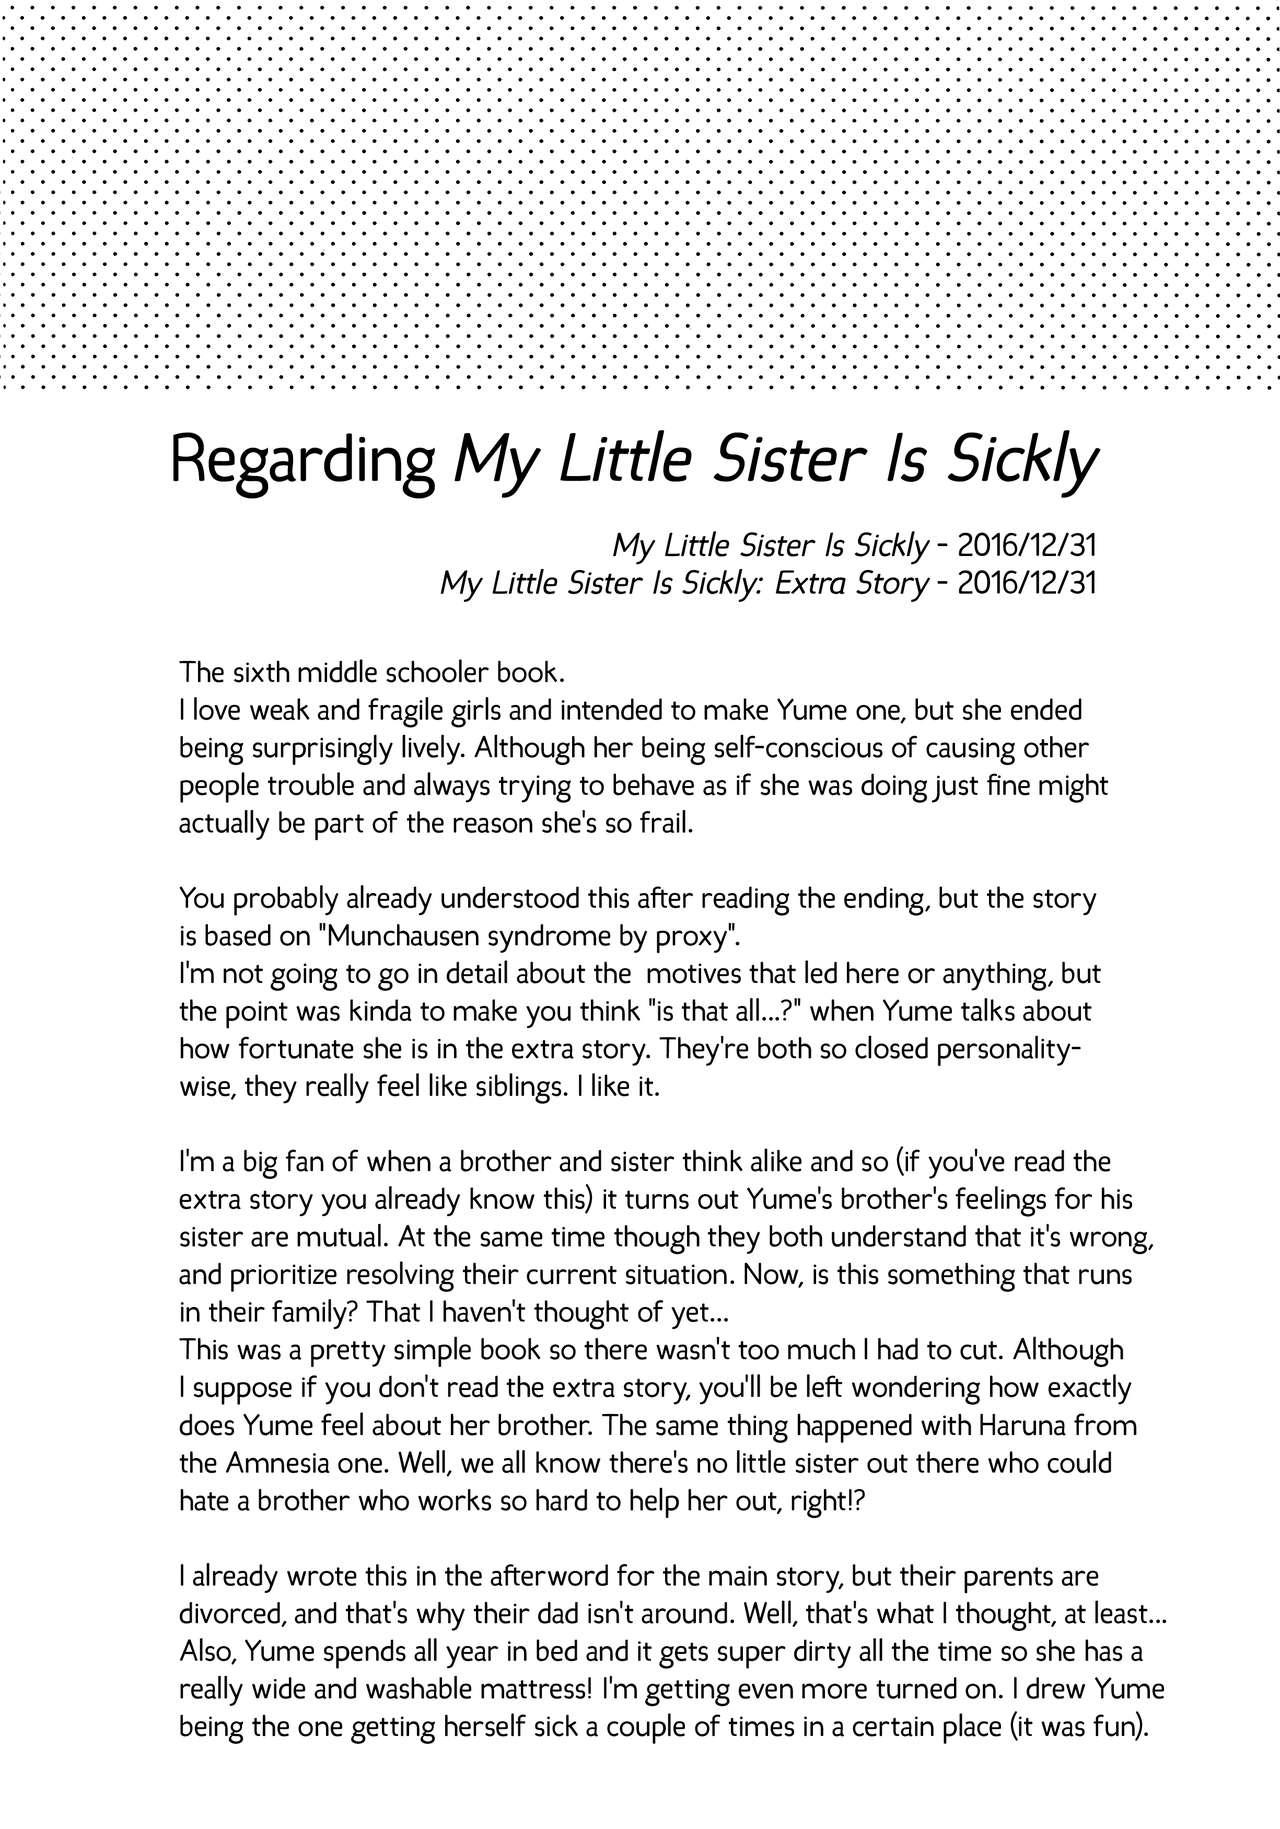 Skinny Imouto wa Sickness no Omake | My Little Sister is Sickly: Extra Story Amateur Porn - Page 10